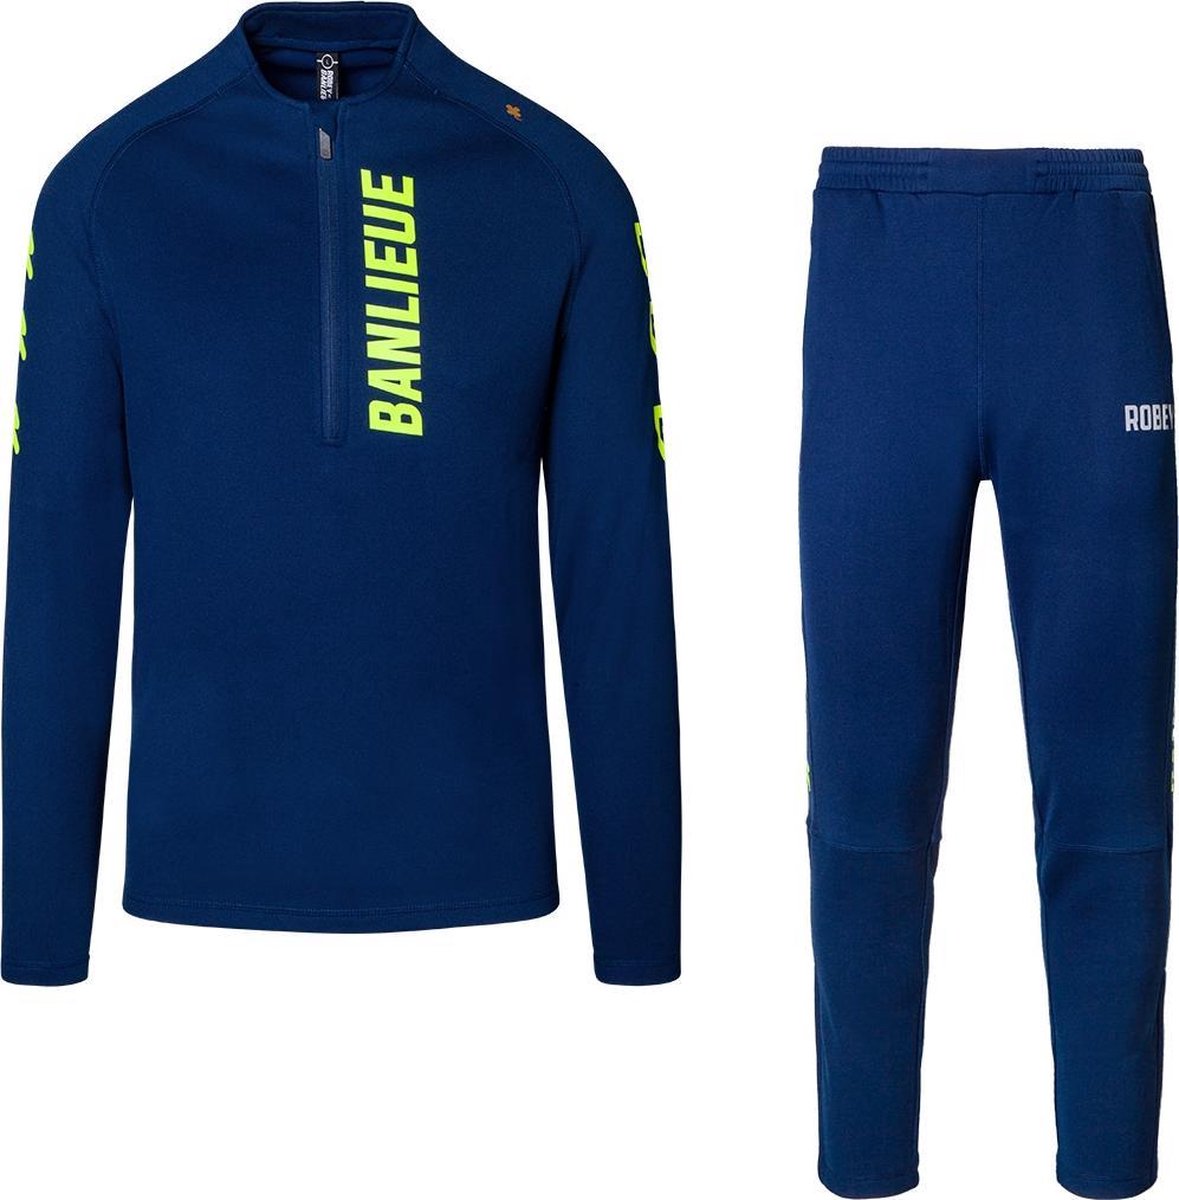 Robey x Banlieue Performance Track Suit | bol.com